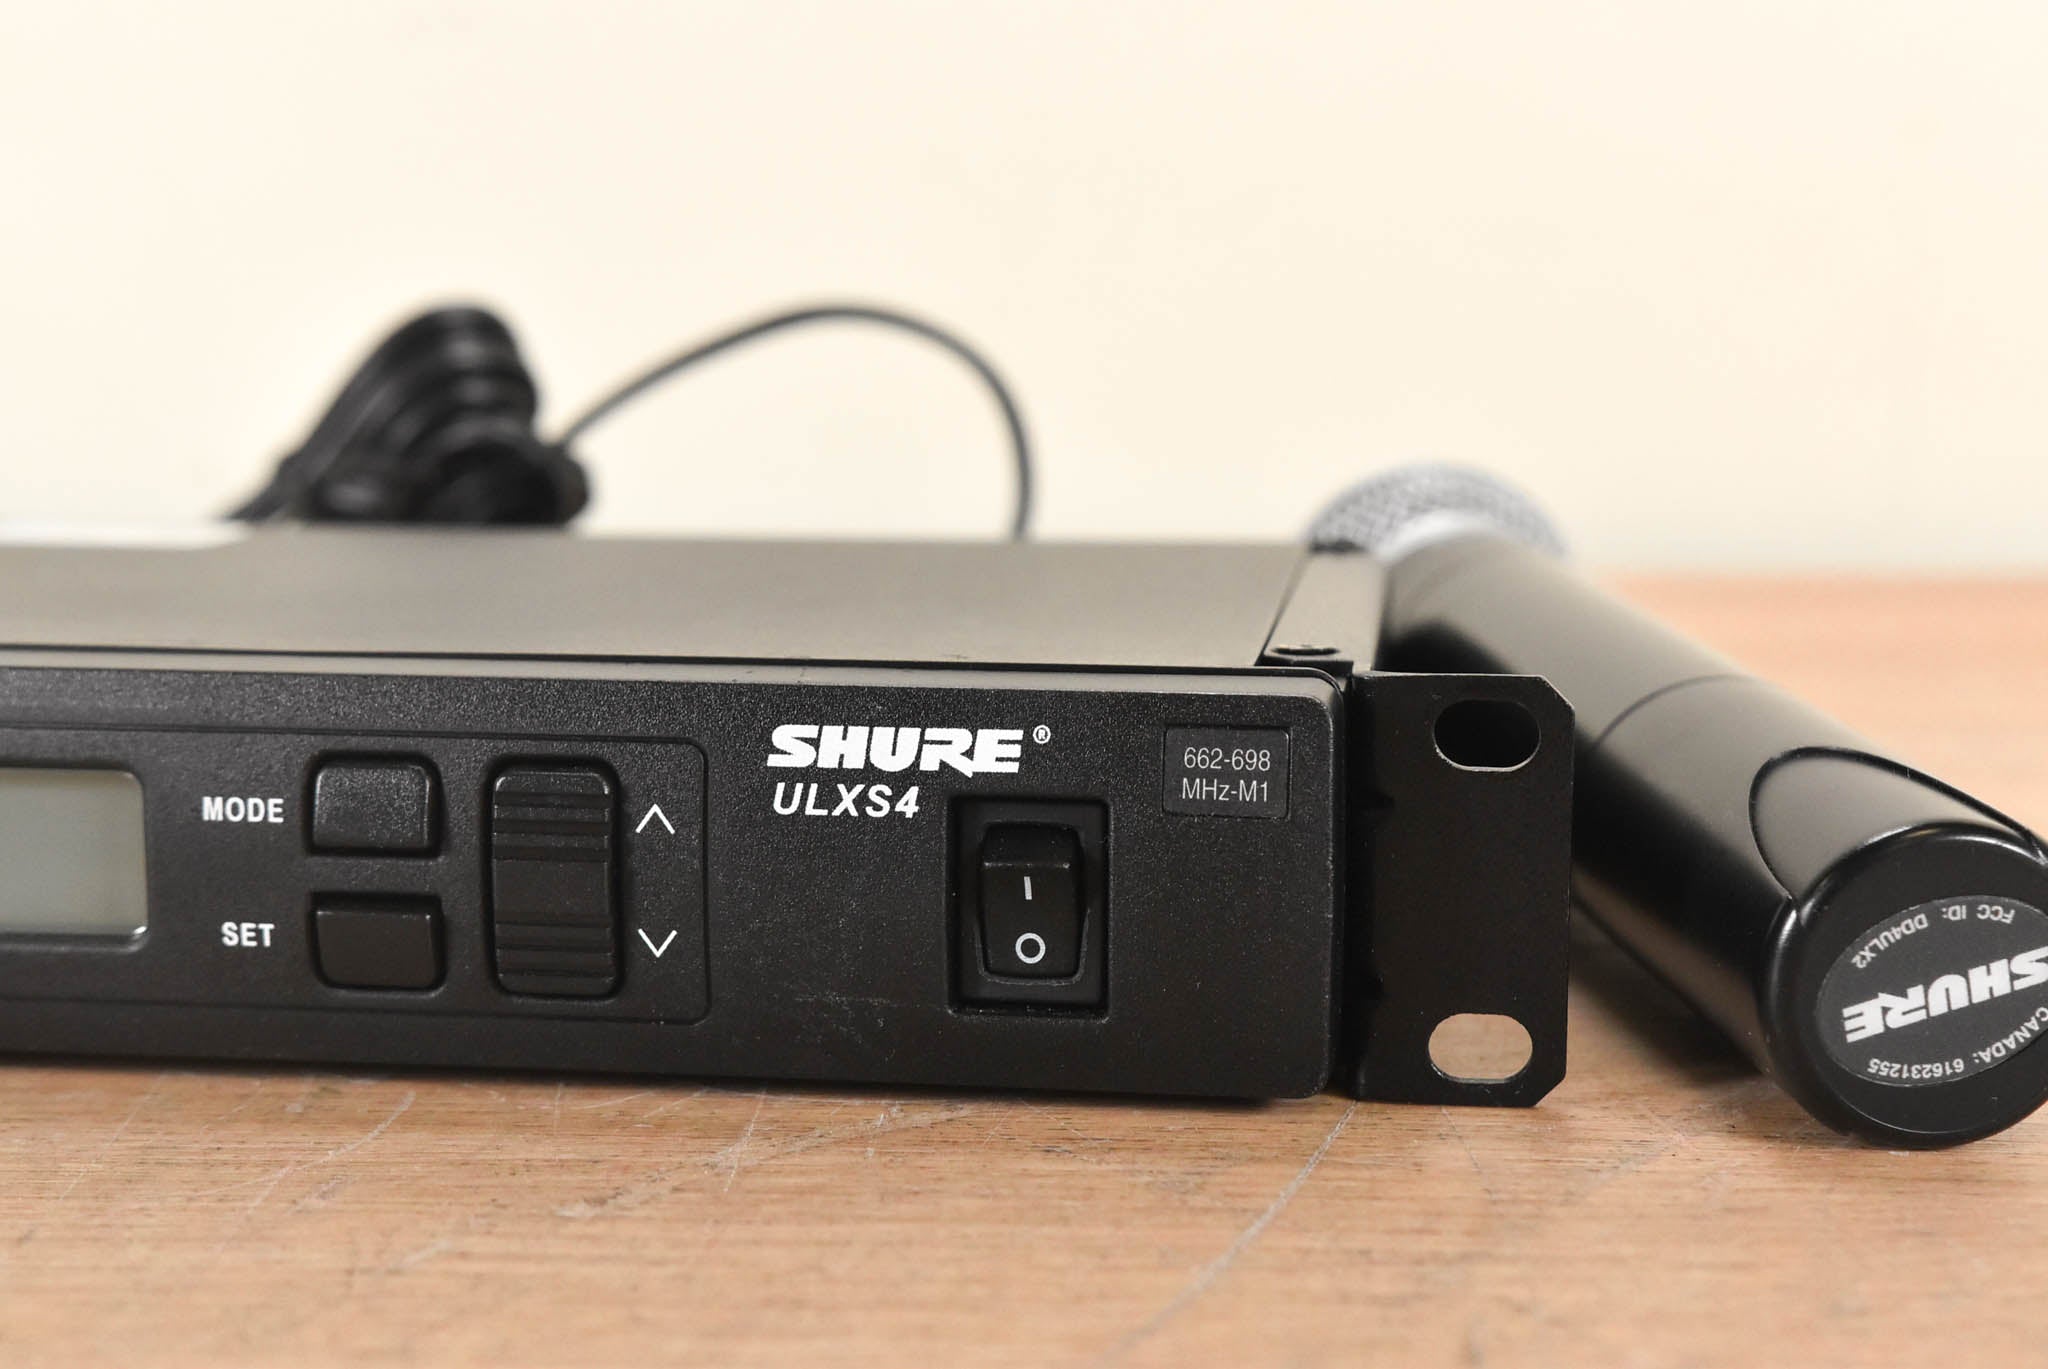 Shure ULXS24/58 Handheld Wireless System - M1 Band: 662-698 MHz